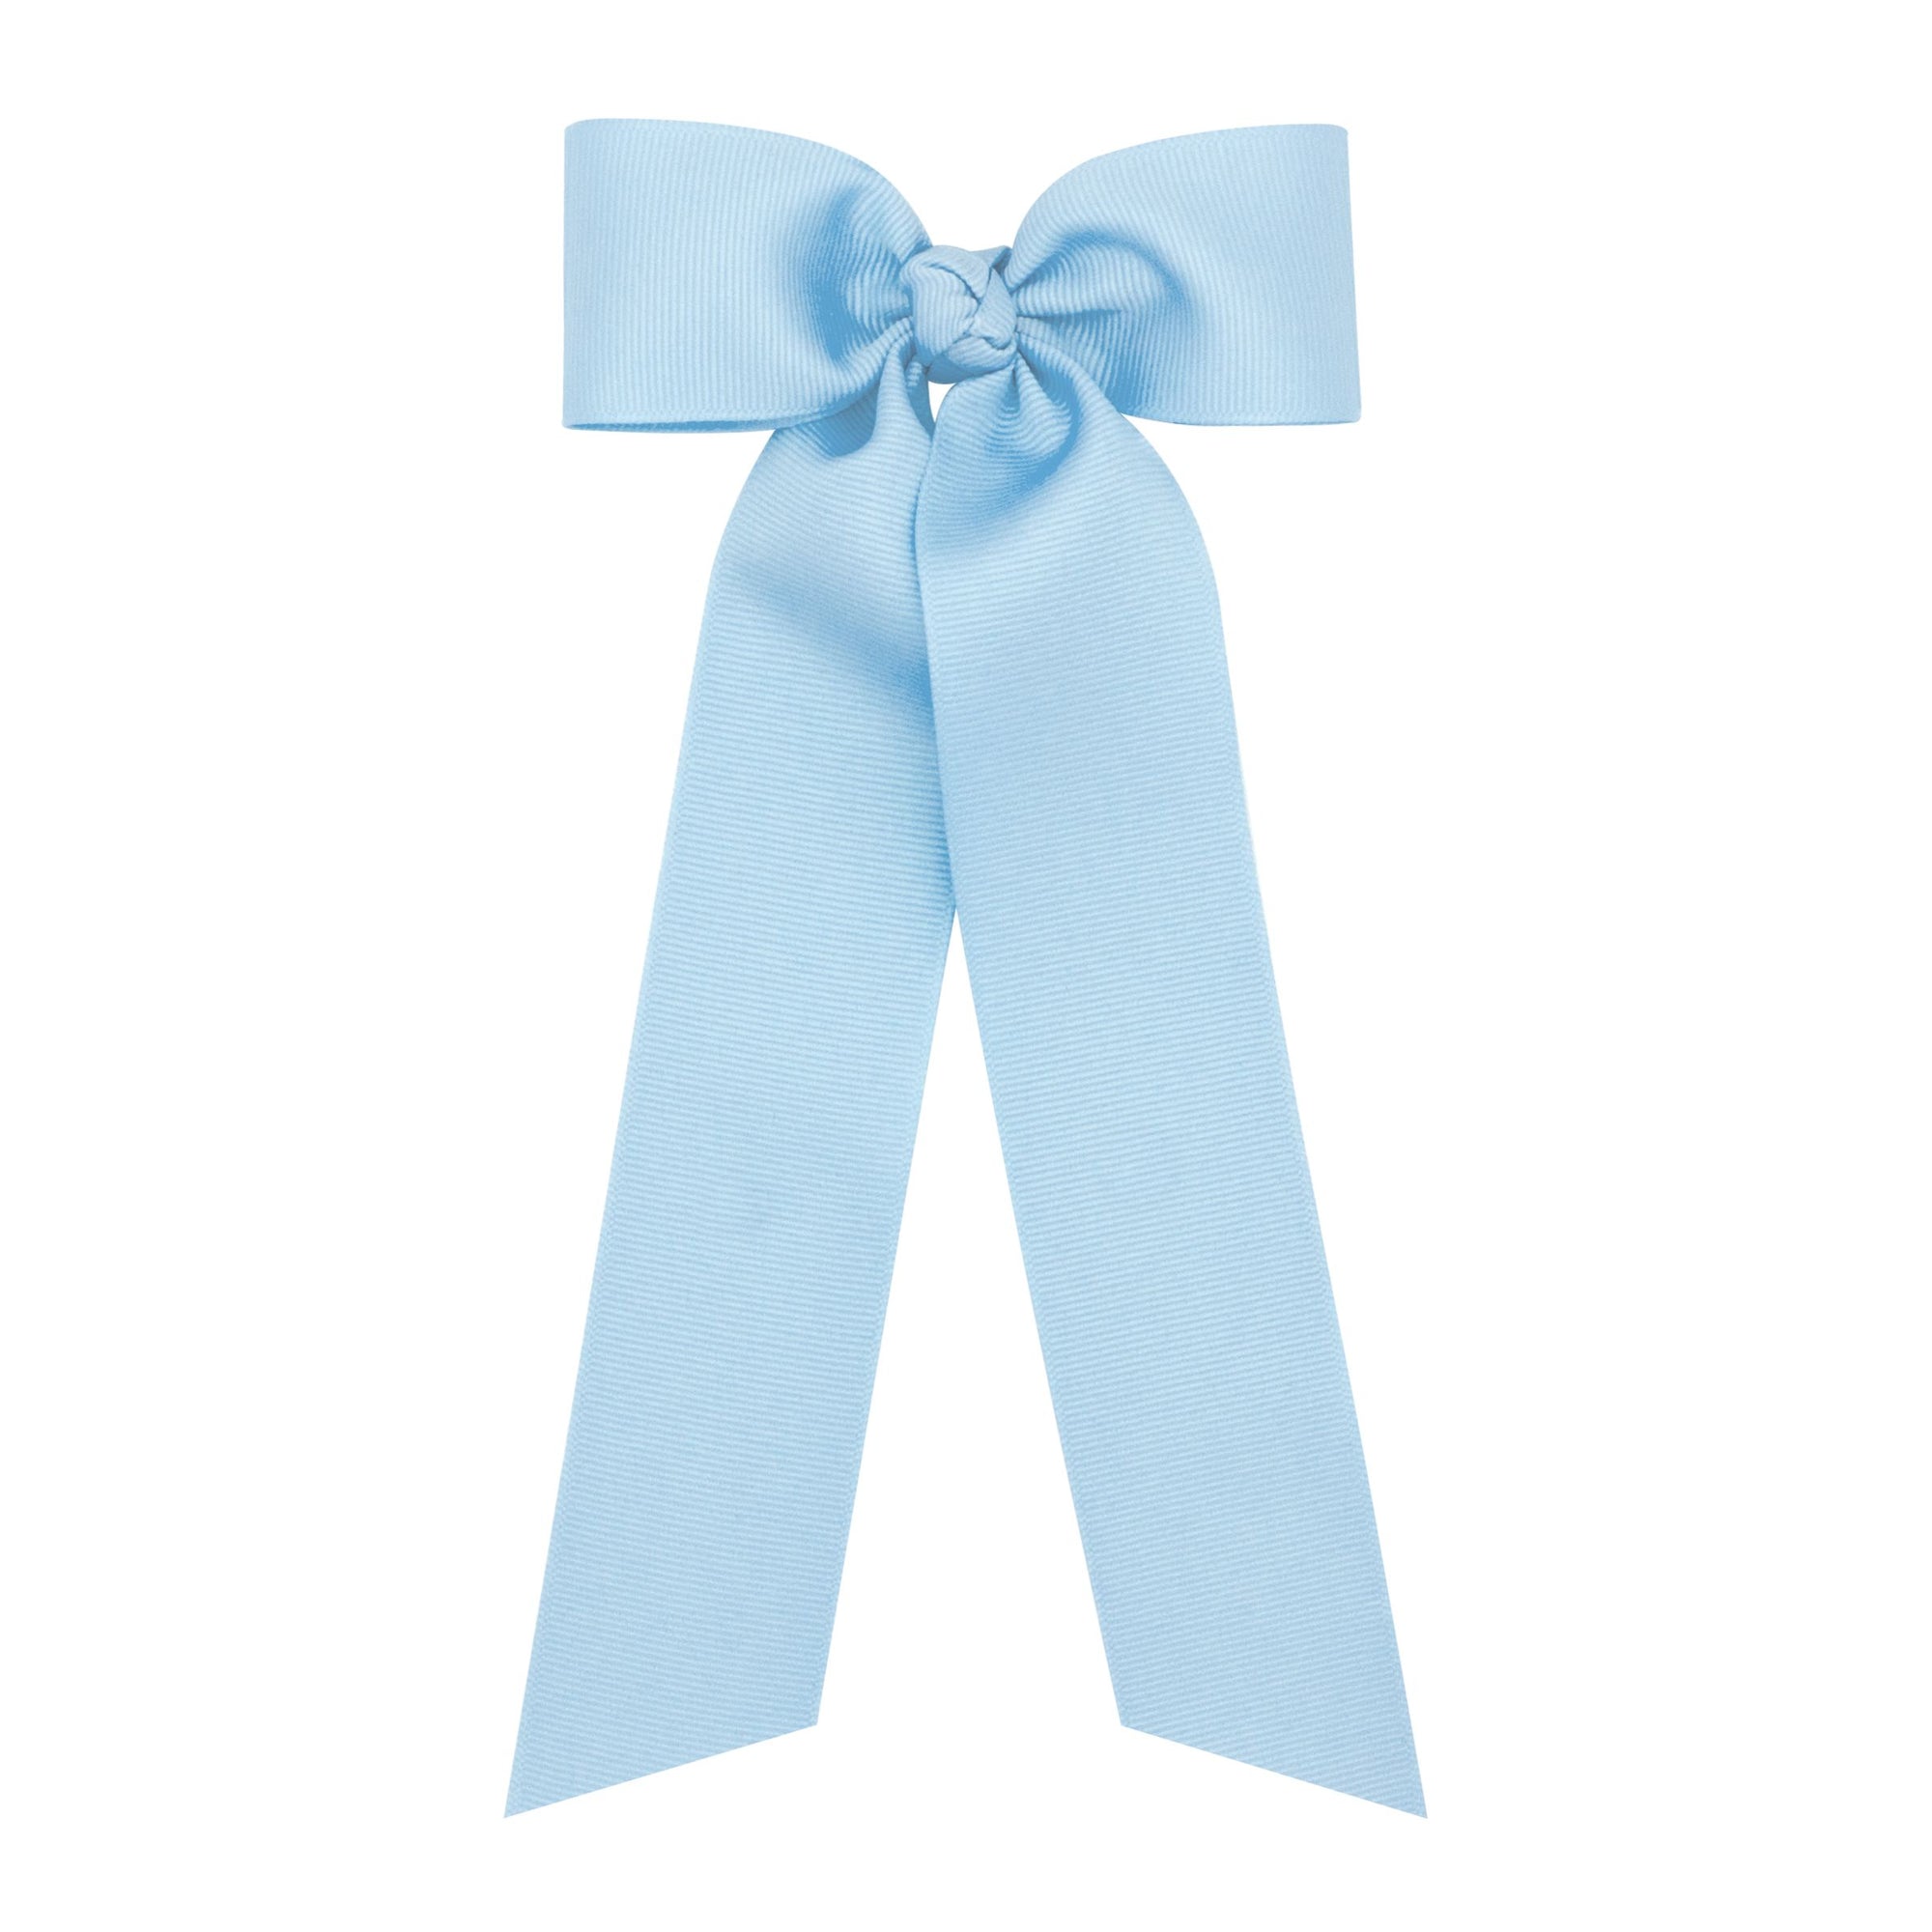 wee ones: Medium Grosgrain Hair Bowtie with Knot Wrap and Streamer Tails - Millennium Blue